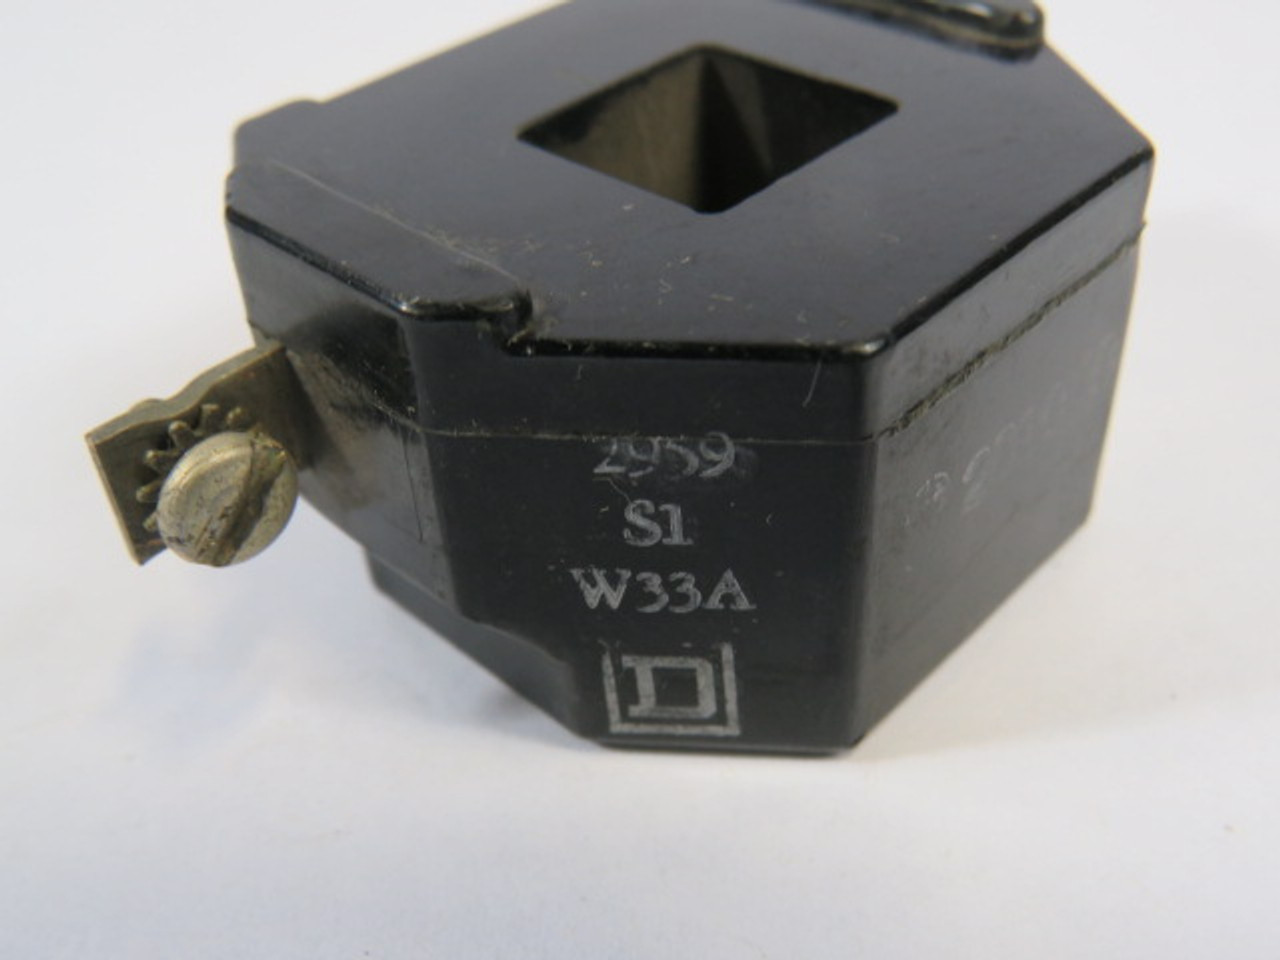 Square D 2959-S1-W33A Coil 110/120V 50/60HZ USED